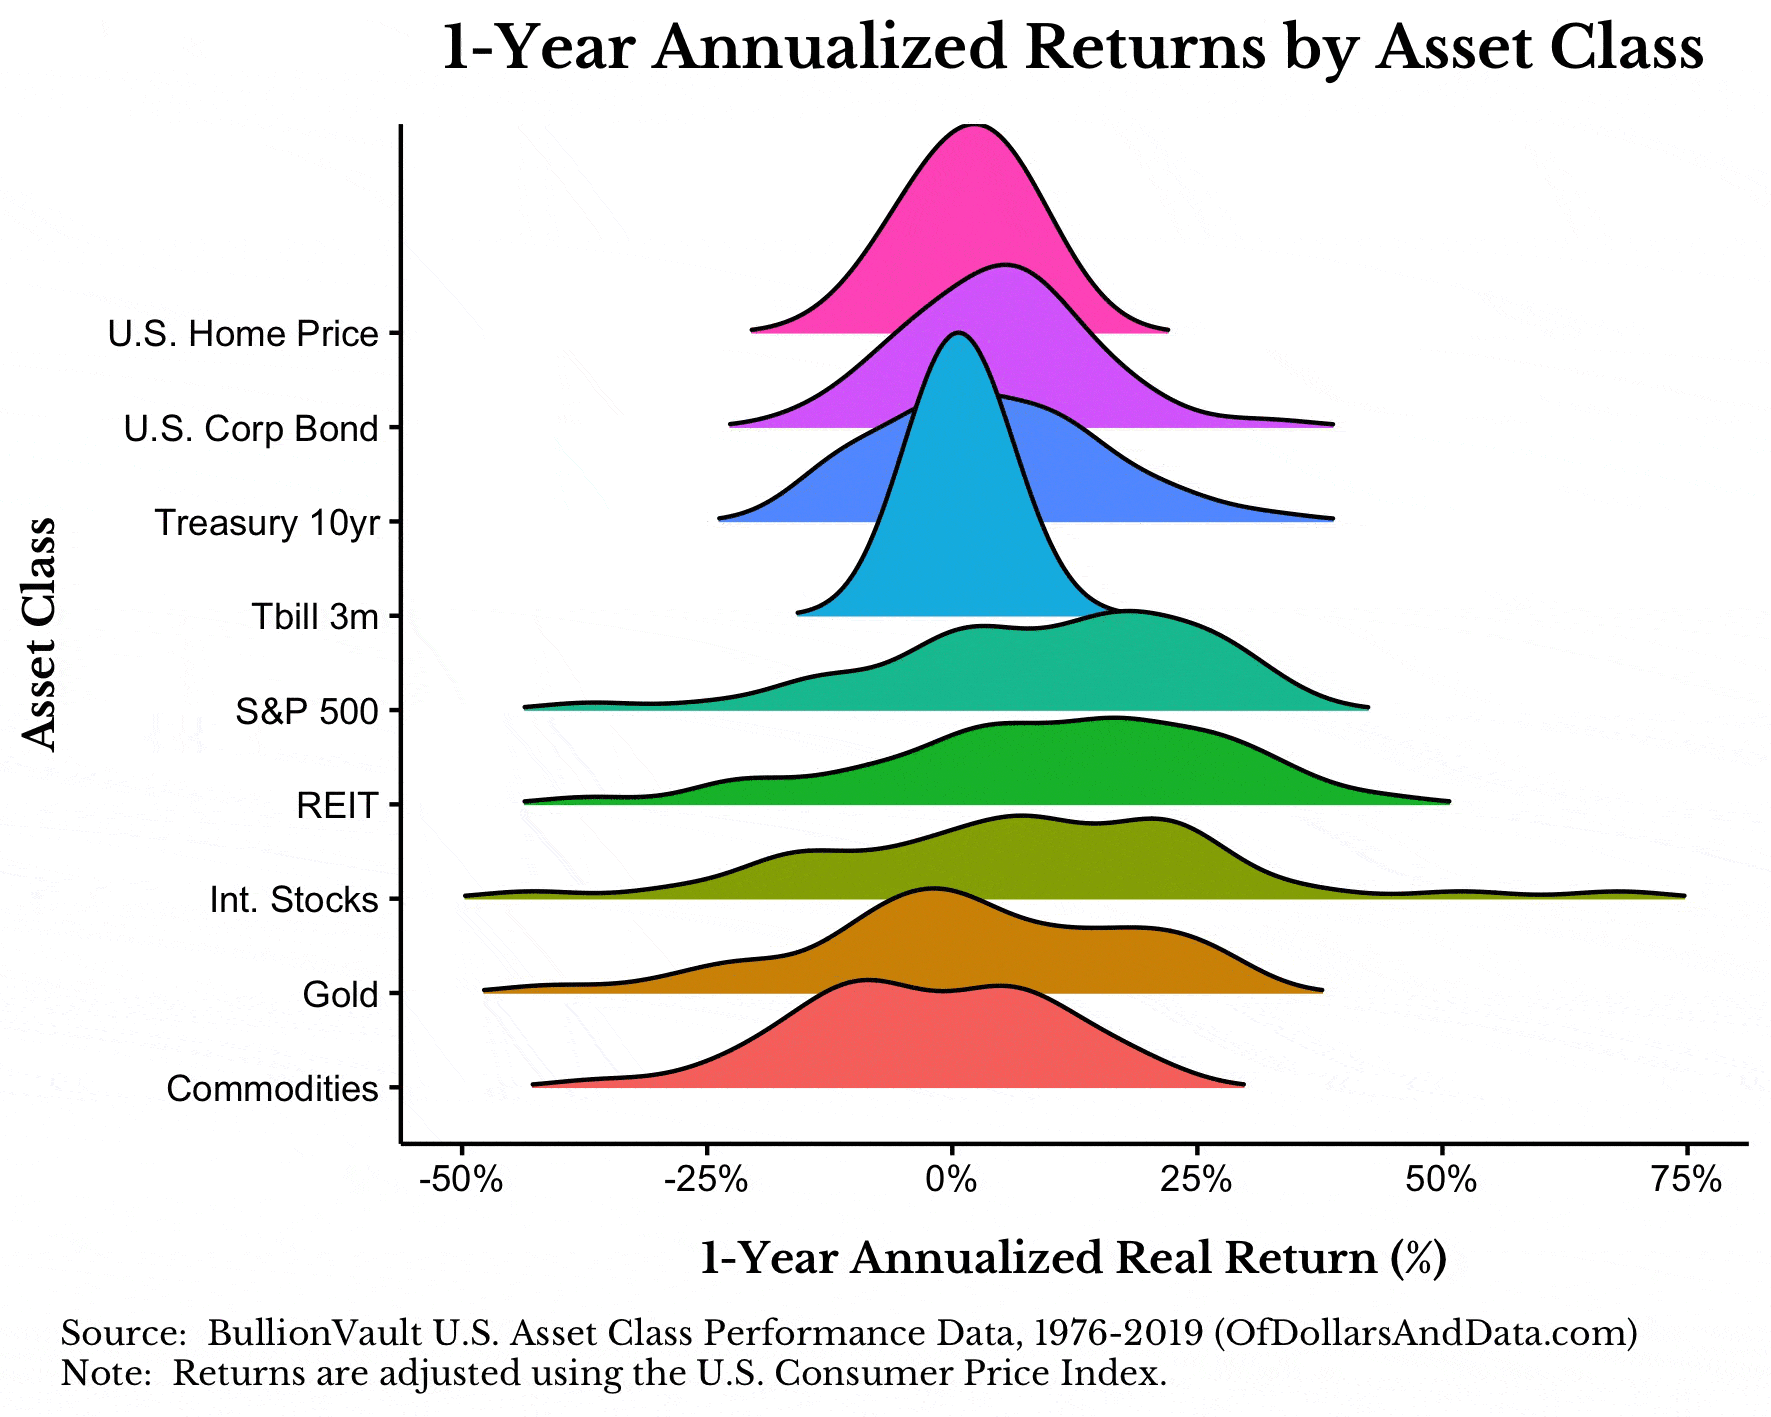 Annualized real returns of different asset classes over different time frames ranging from 1 to 20 years.